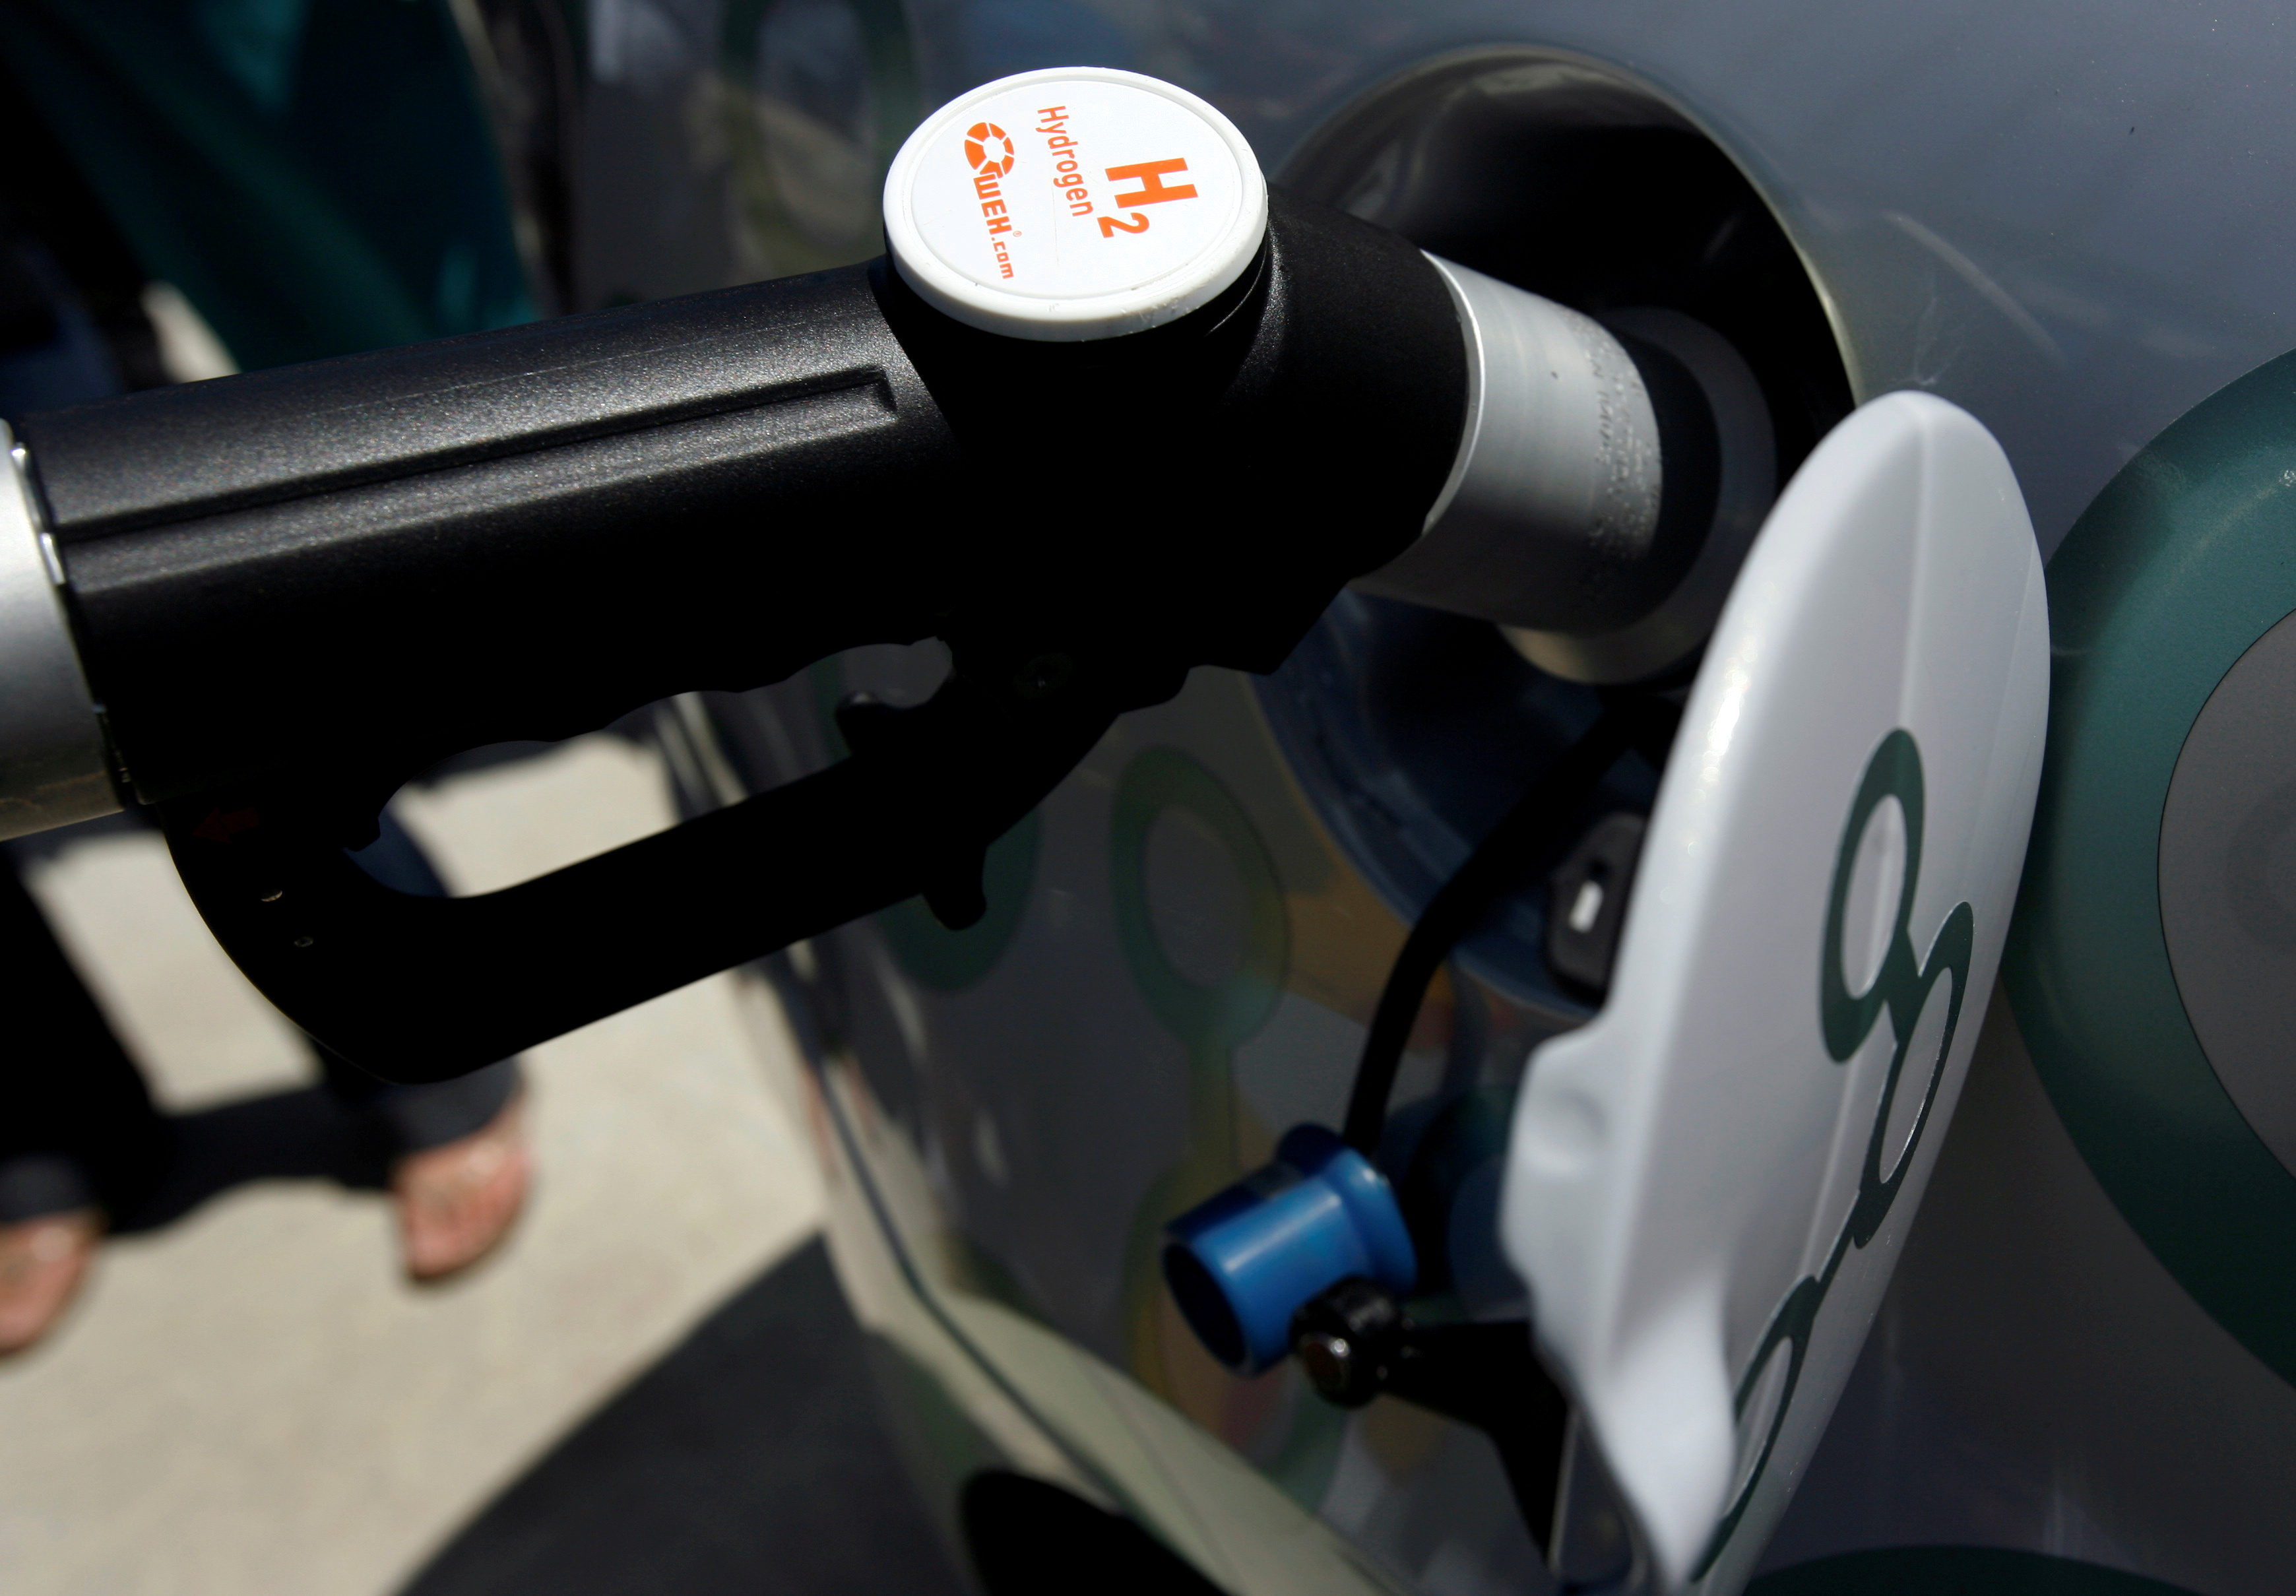 A GM Hydrogen Fuel Cell vehicle is seen being fueled at the Shell Hydrogen fueling station during its opening at JFK Airport in New York